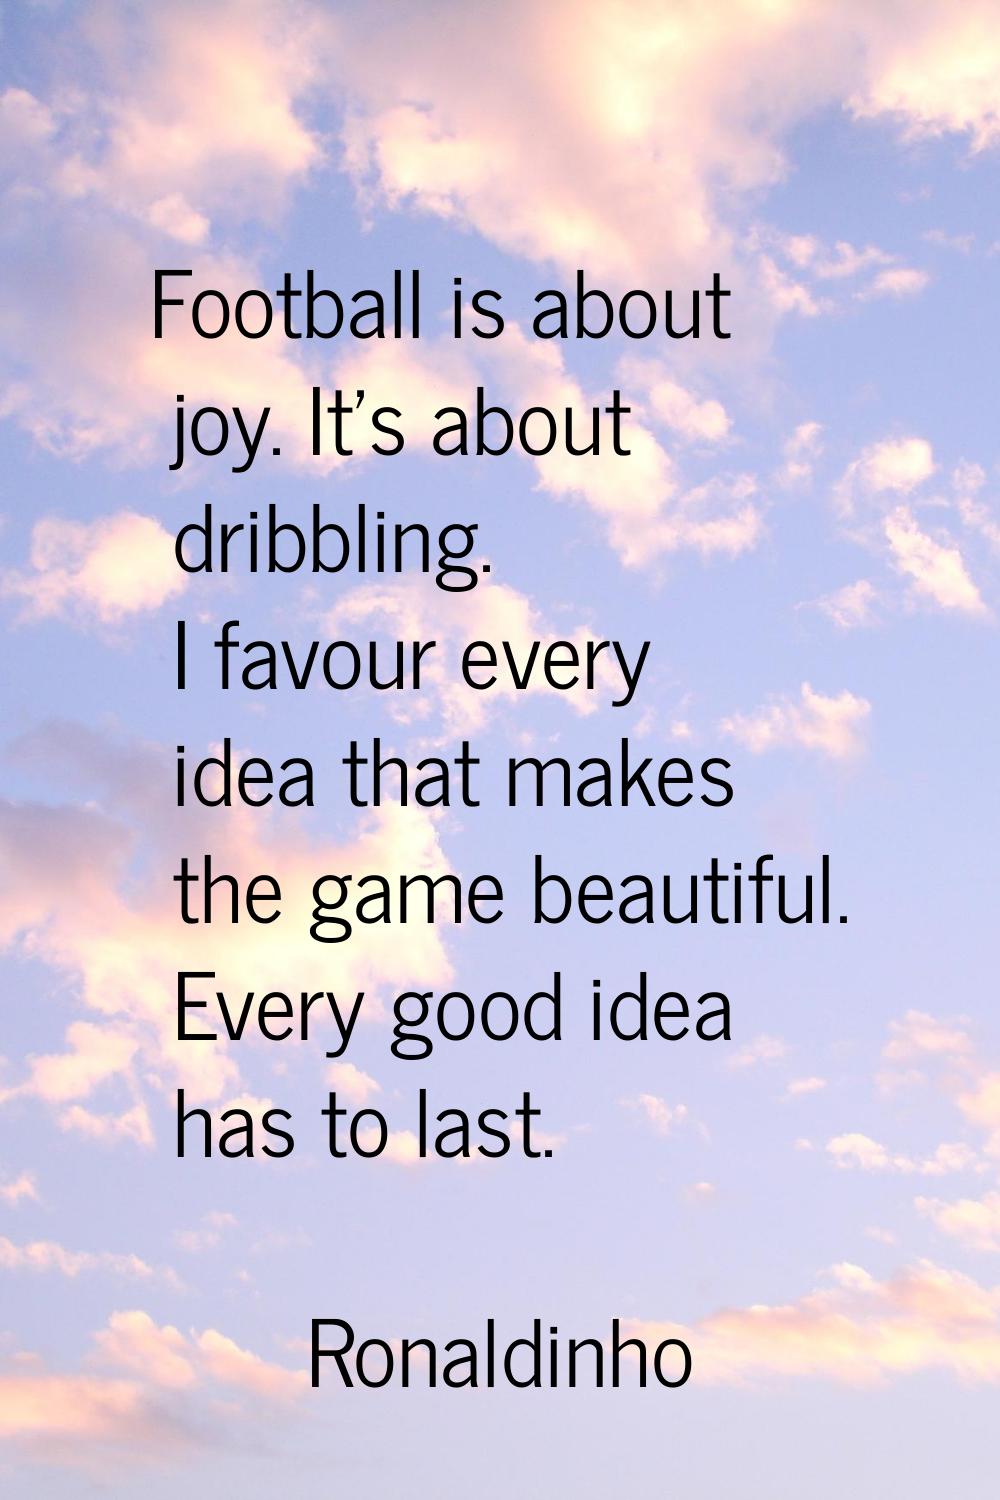 Football is about joy. It's about dribbling. I favour every idea that makes the game beautiful. Eve